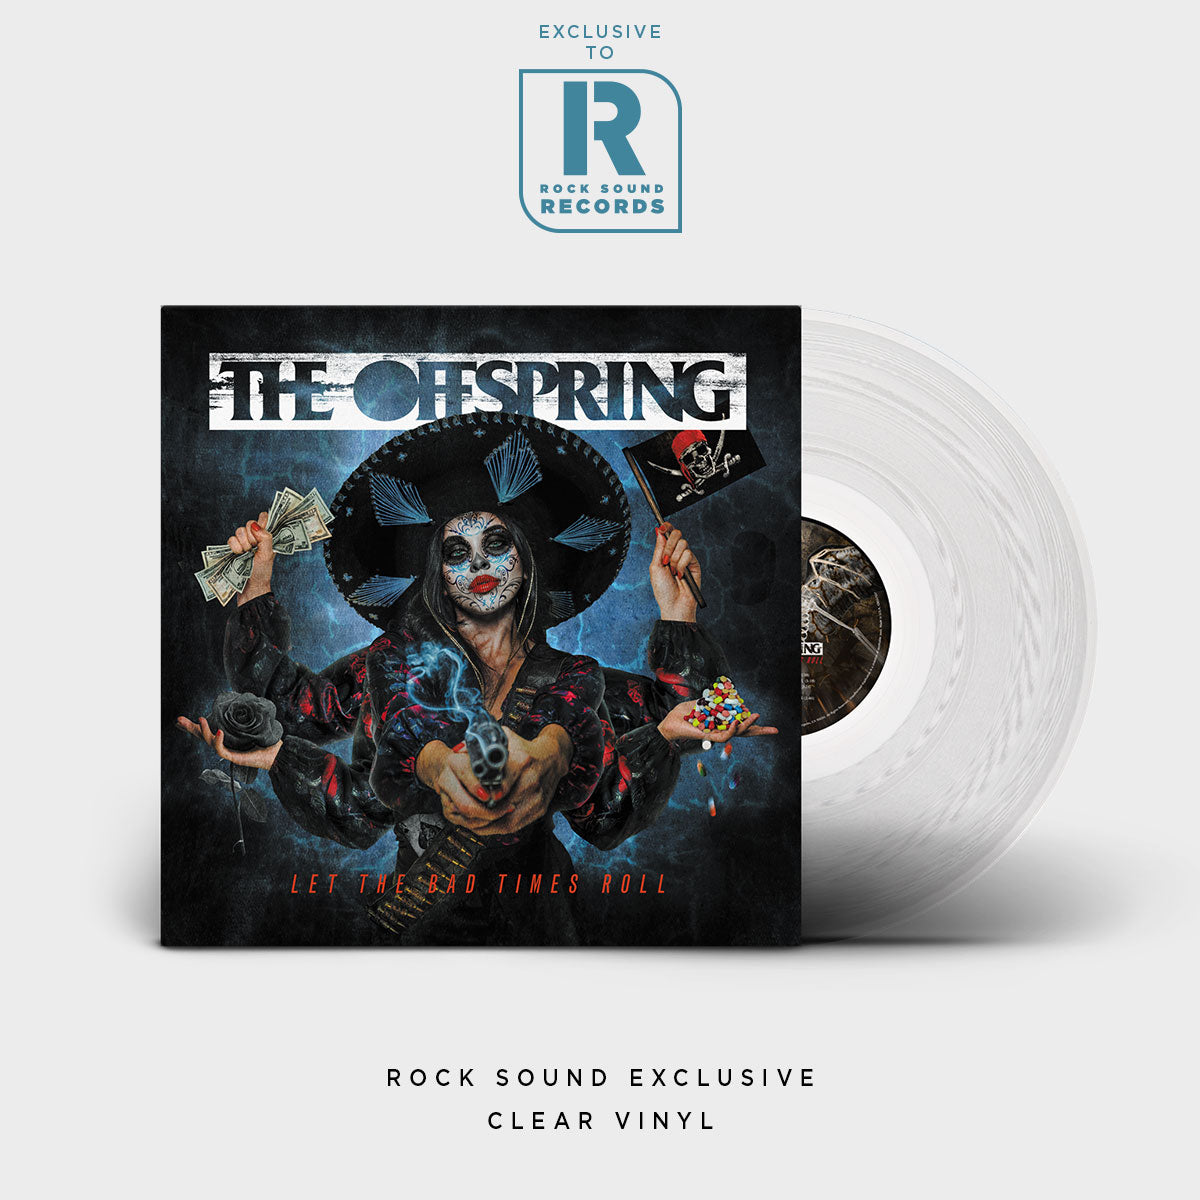 Shop the best deals on The Offspring vinyl, including THE OFFSPRING - ‘LET THE BAD TIMES ROLL’ EXCLUSIVE VINYL